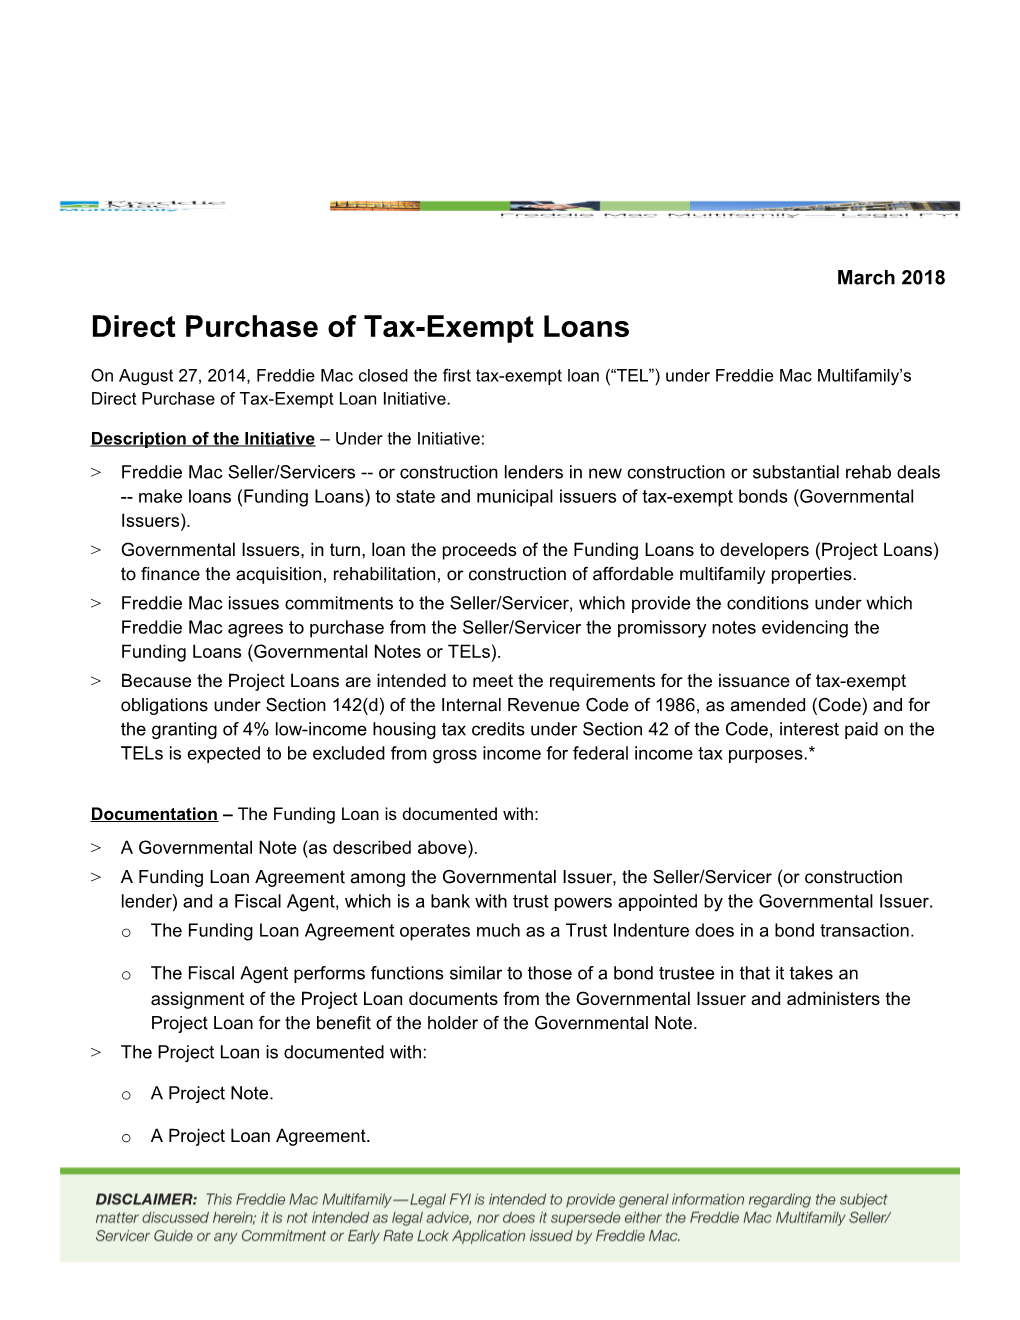 Direct Purchase of Tax-Exempt Loans